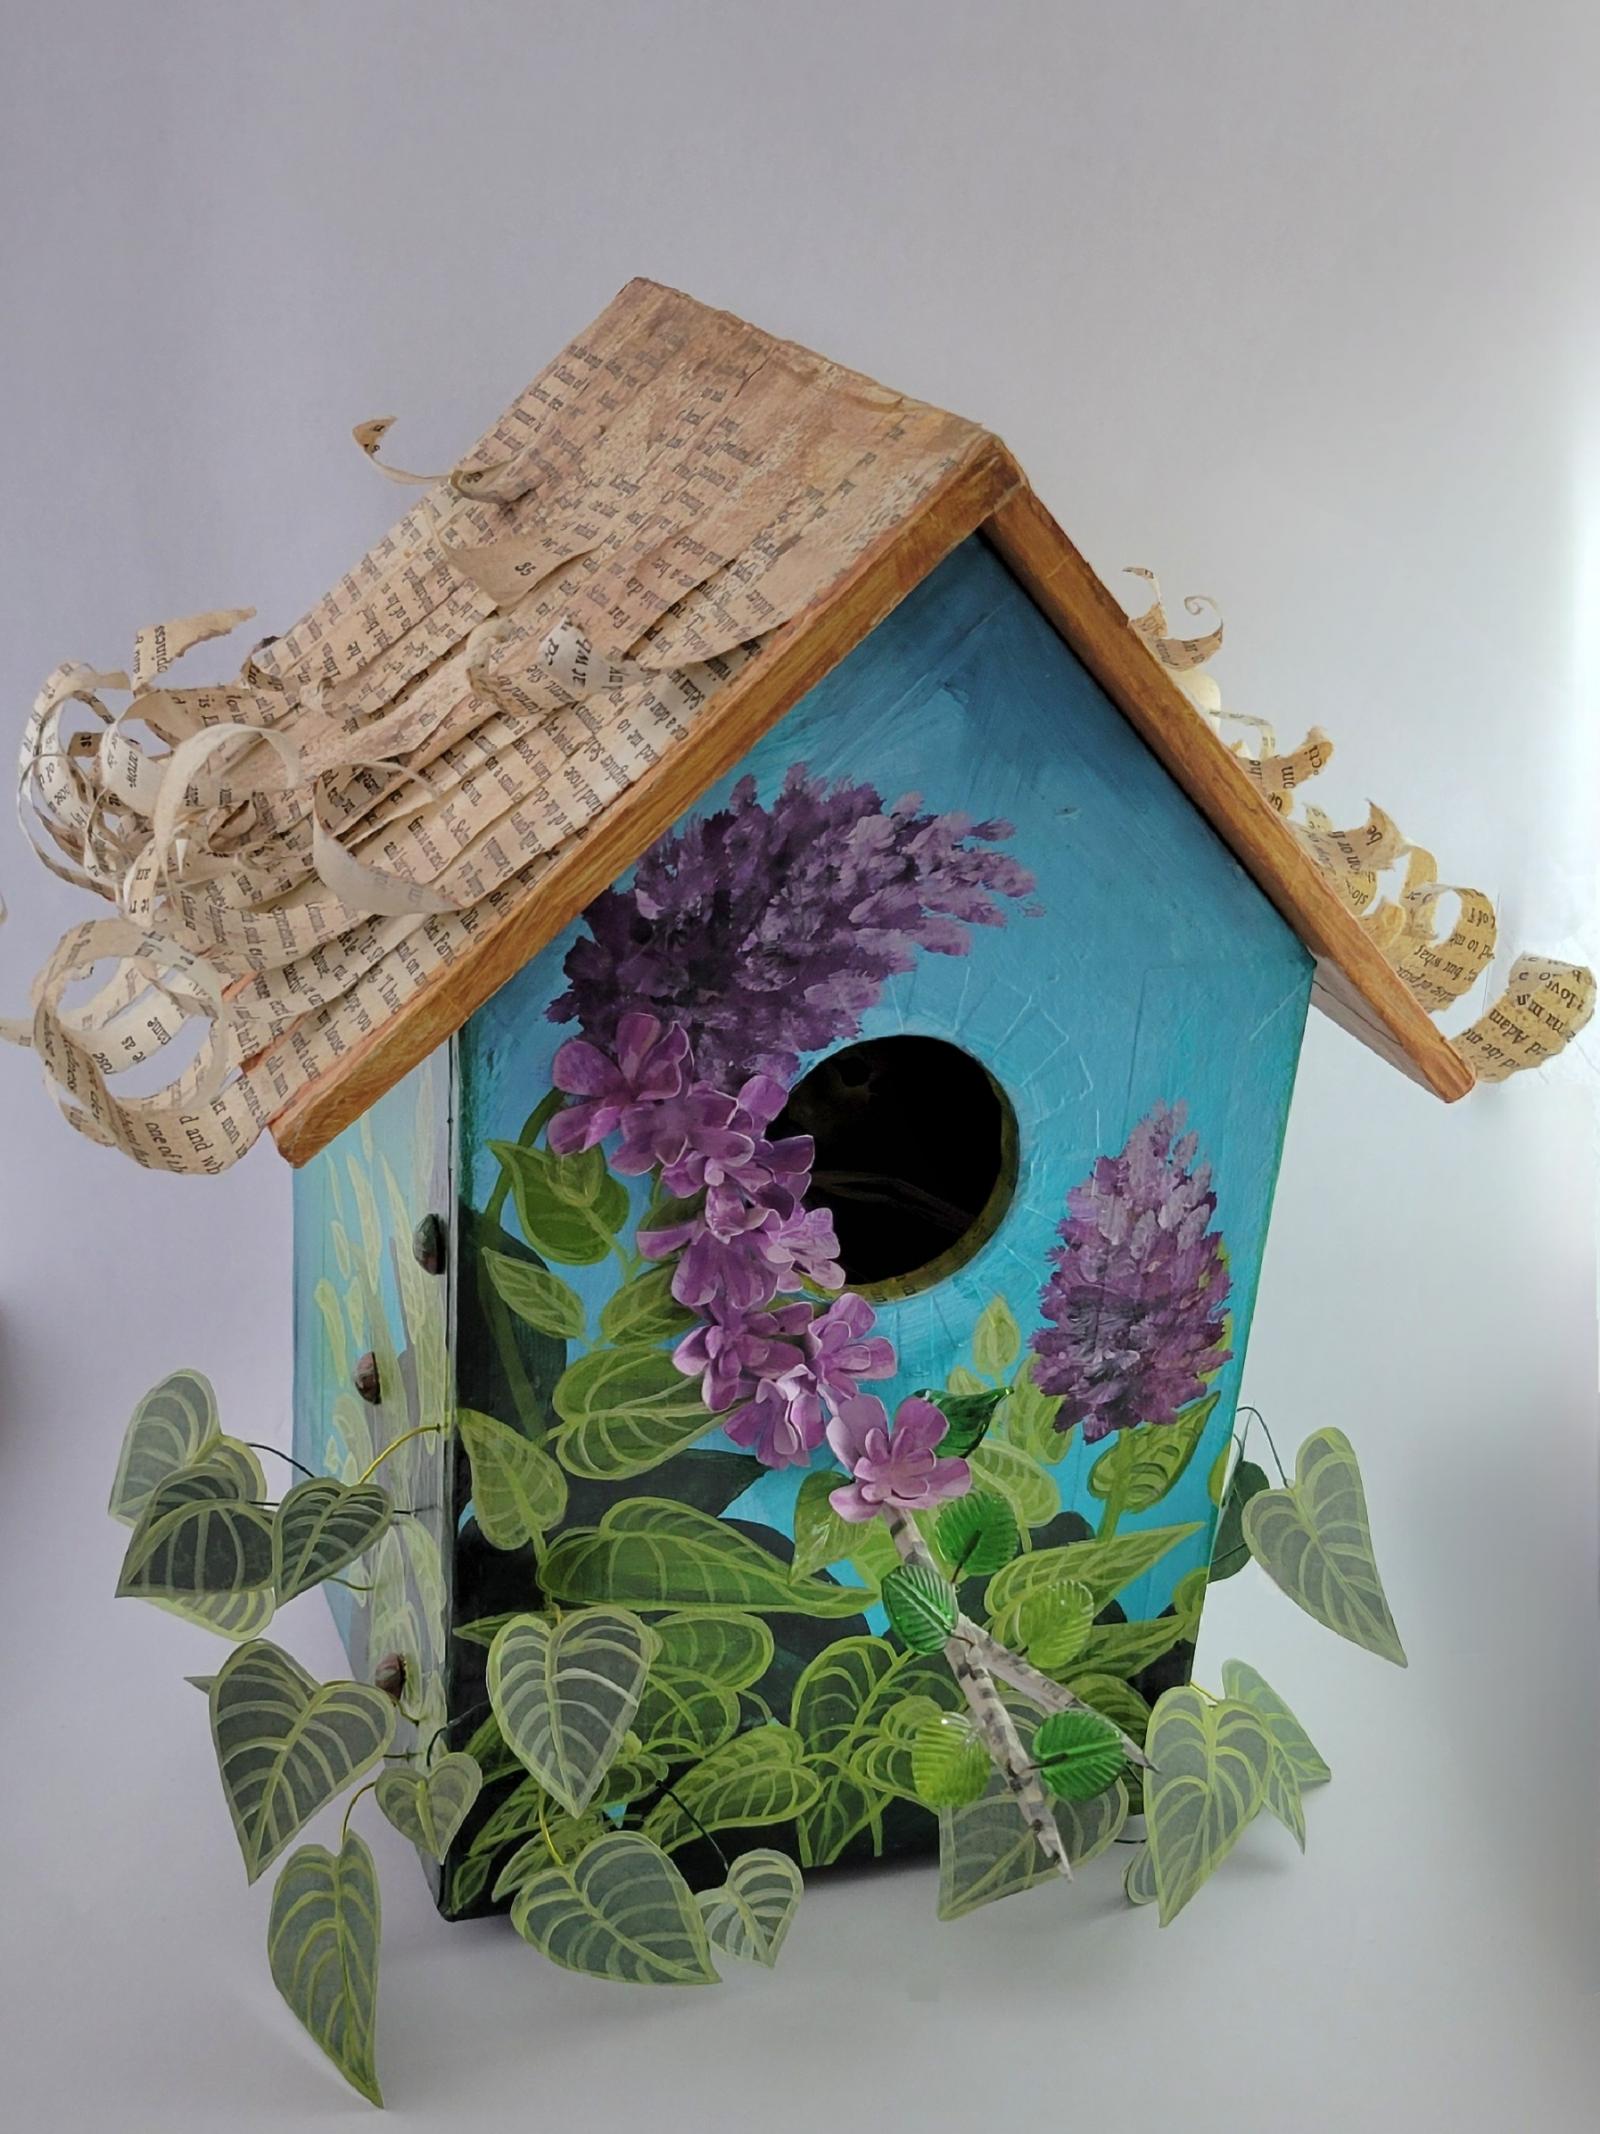 This mixed media piece was created from cast-off materials - shipping boxes, old books, scrapbook paper, beads etc. The roof can be removed to view inside where a paper clay bird watches over her precious eggs. Various symbology is present in the piece. On the back of the pieces is a night sky with a bird constellation. There is a removable stand (not shown) made from a tree limb where a poem about birds is inscribed.